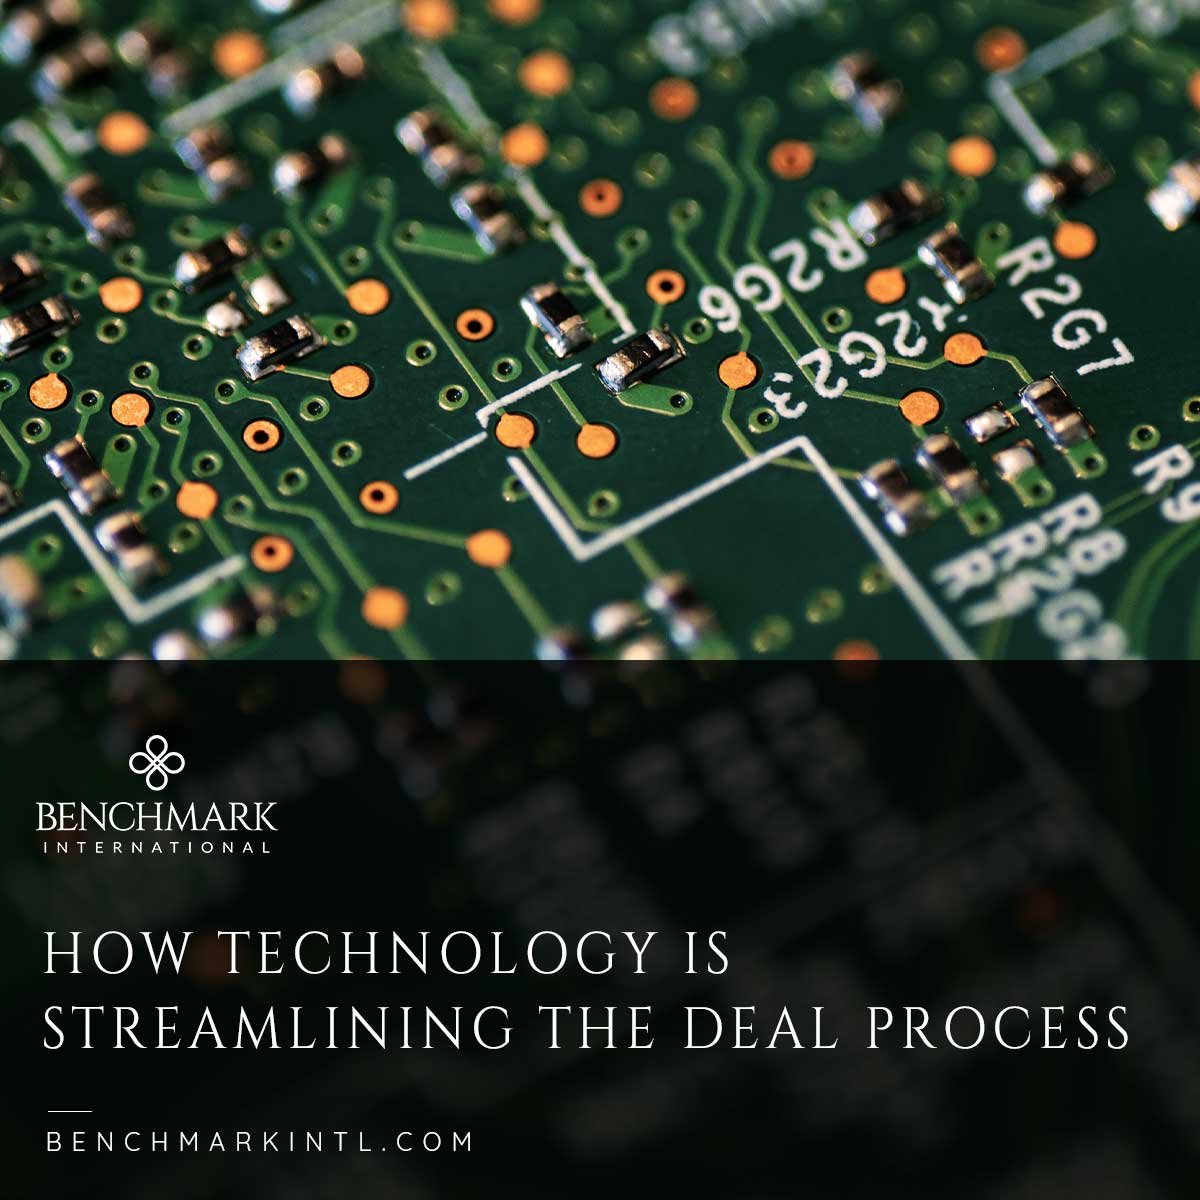 How technology is streamlining the deal process